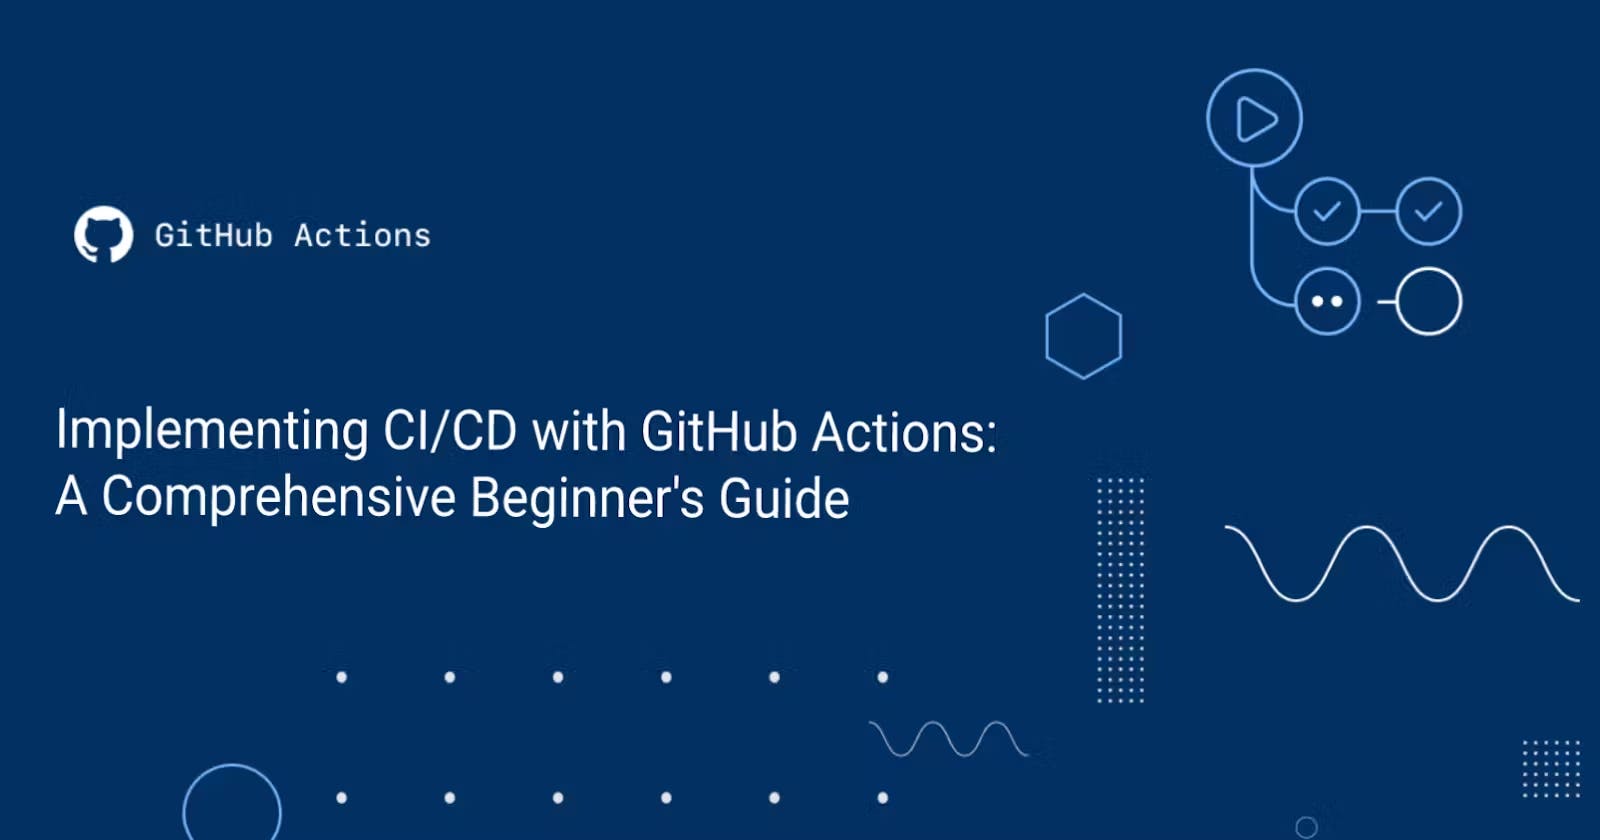 Implementing CI/CD with GitHub Actions: A Comprehensive Beginner's Guide: Part 2